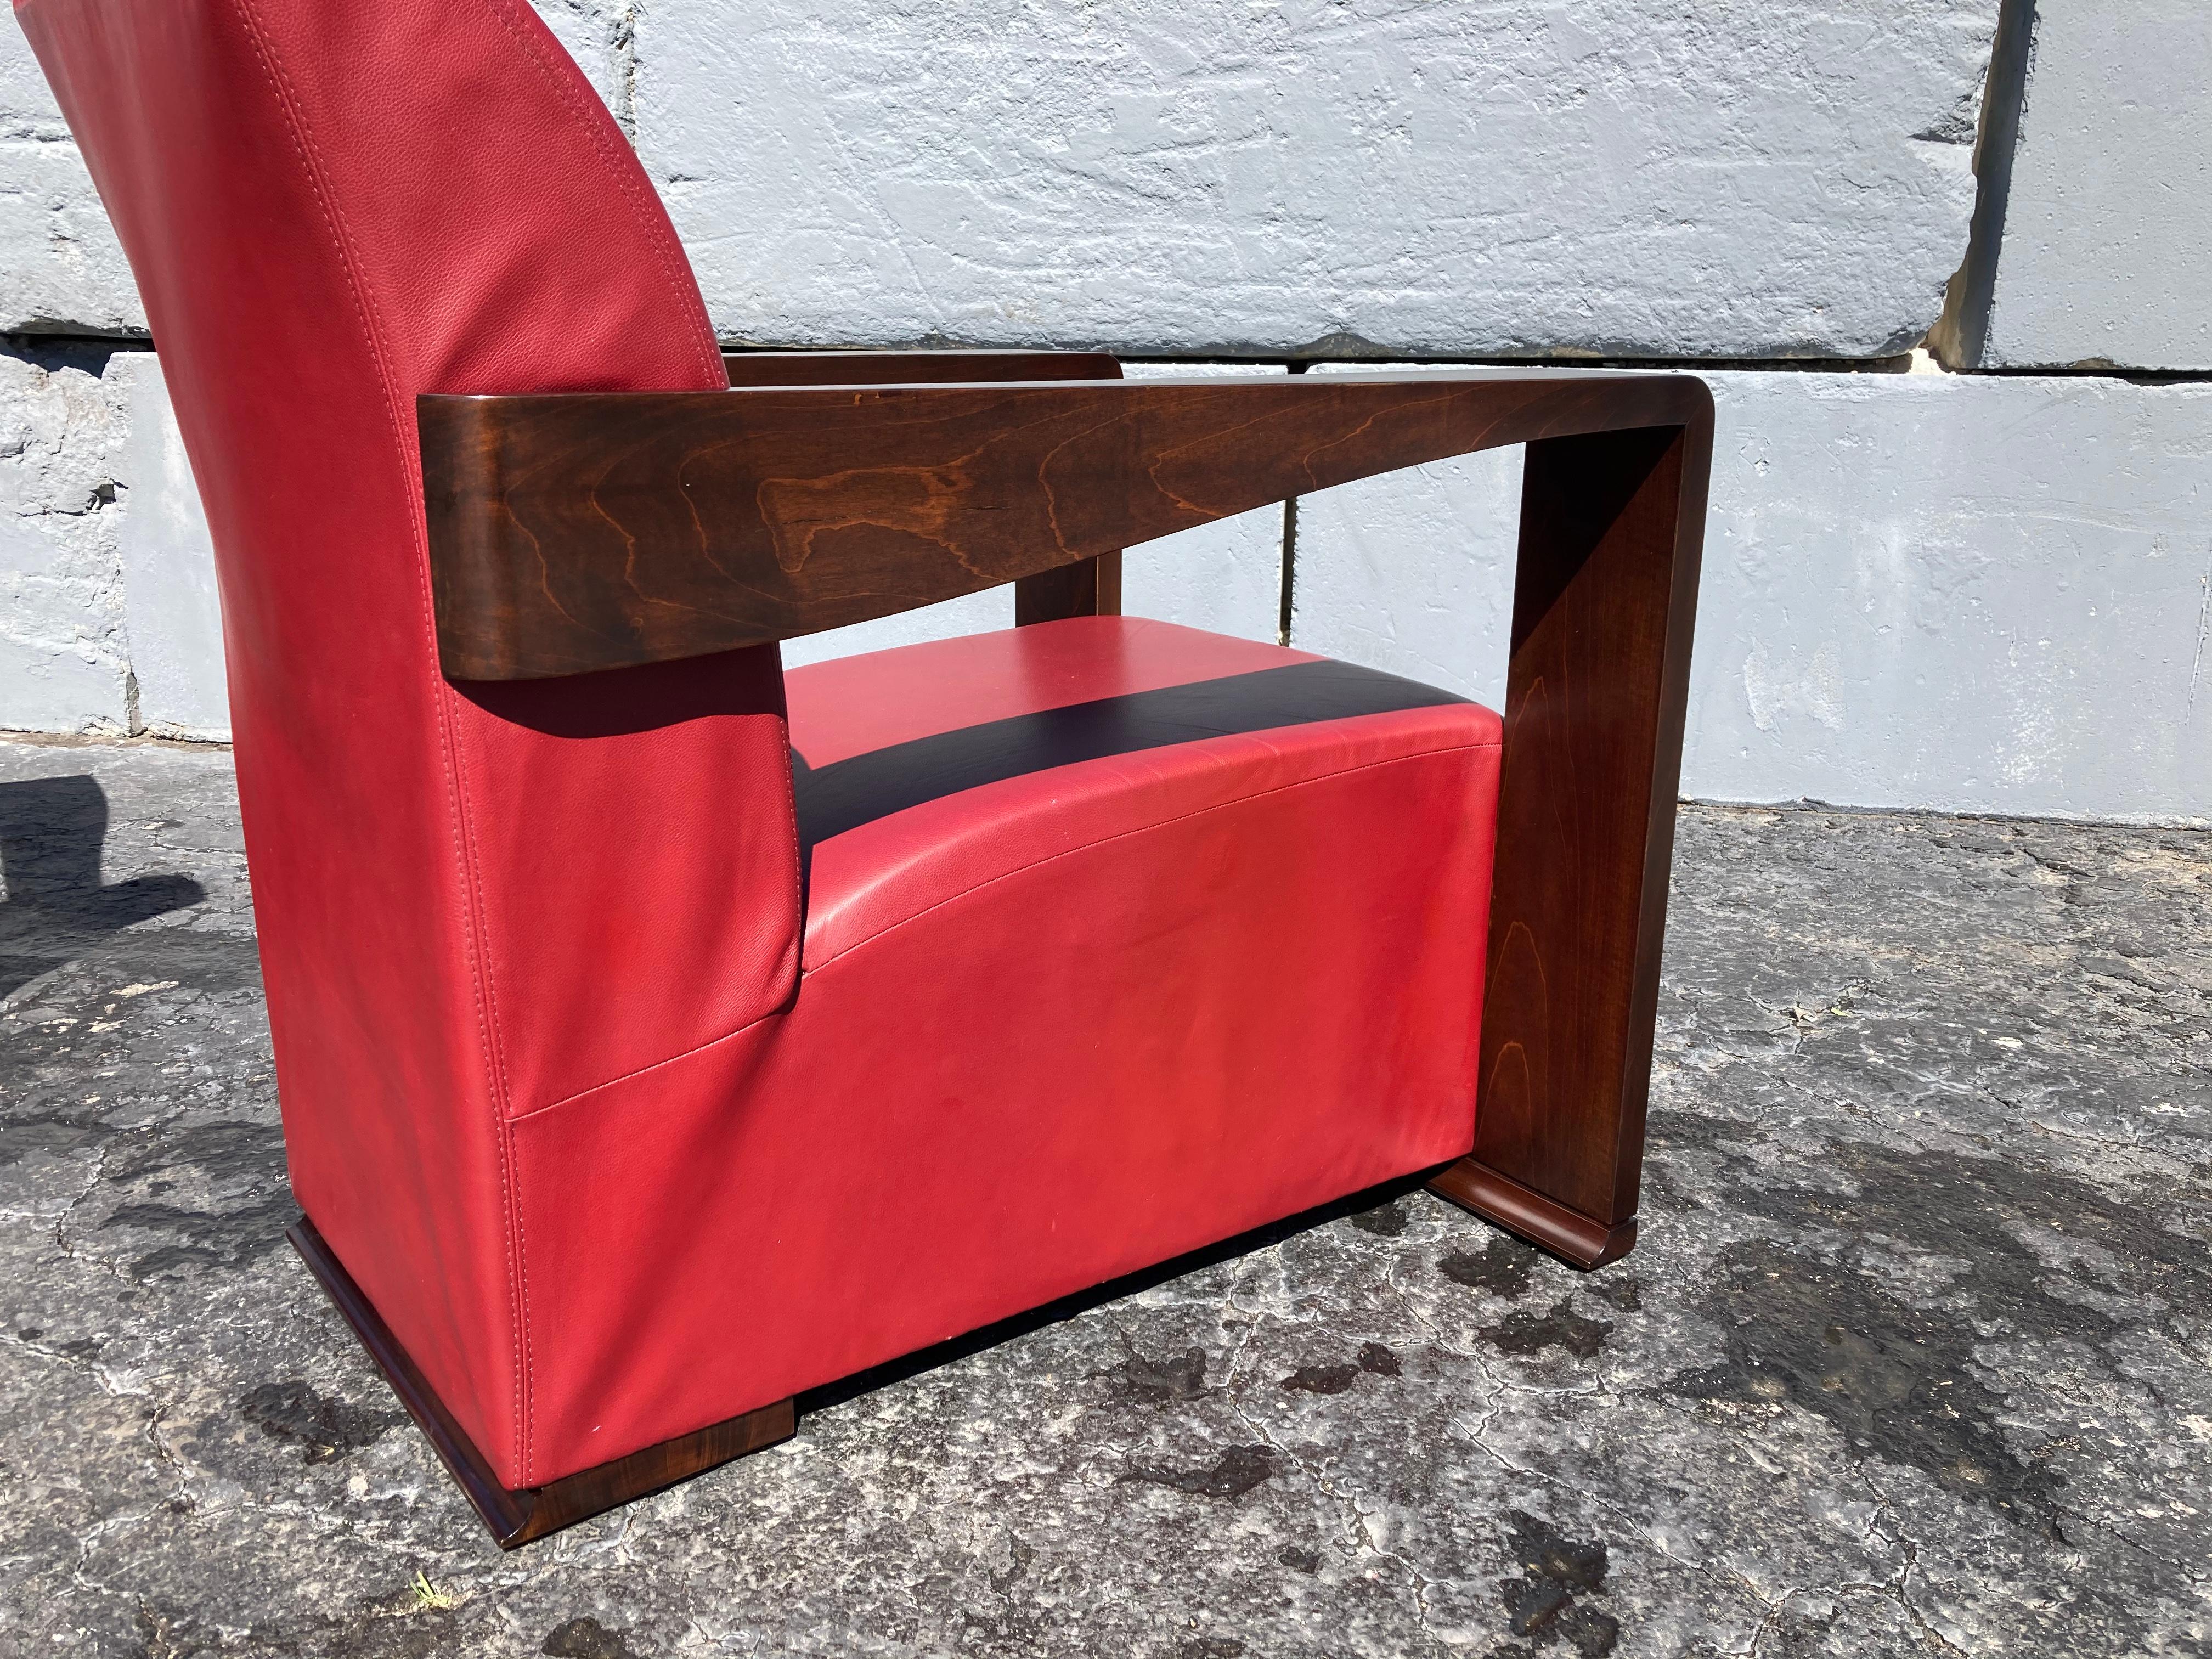 Art Deco Style Lounge Chairs, Red Leather In Good Condition For Sale In Miami, FL